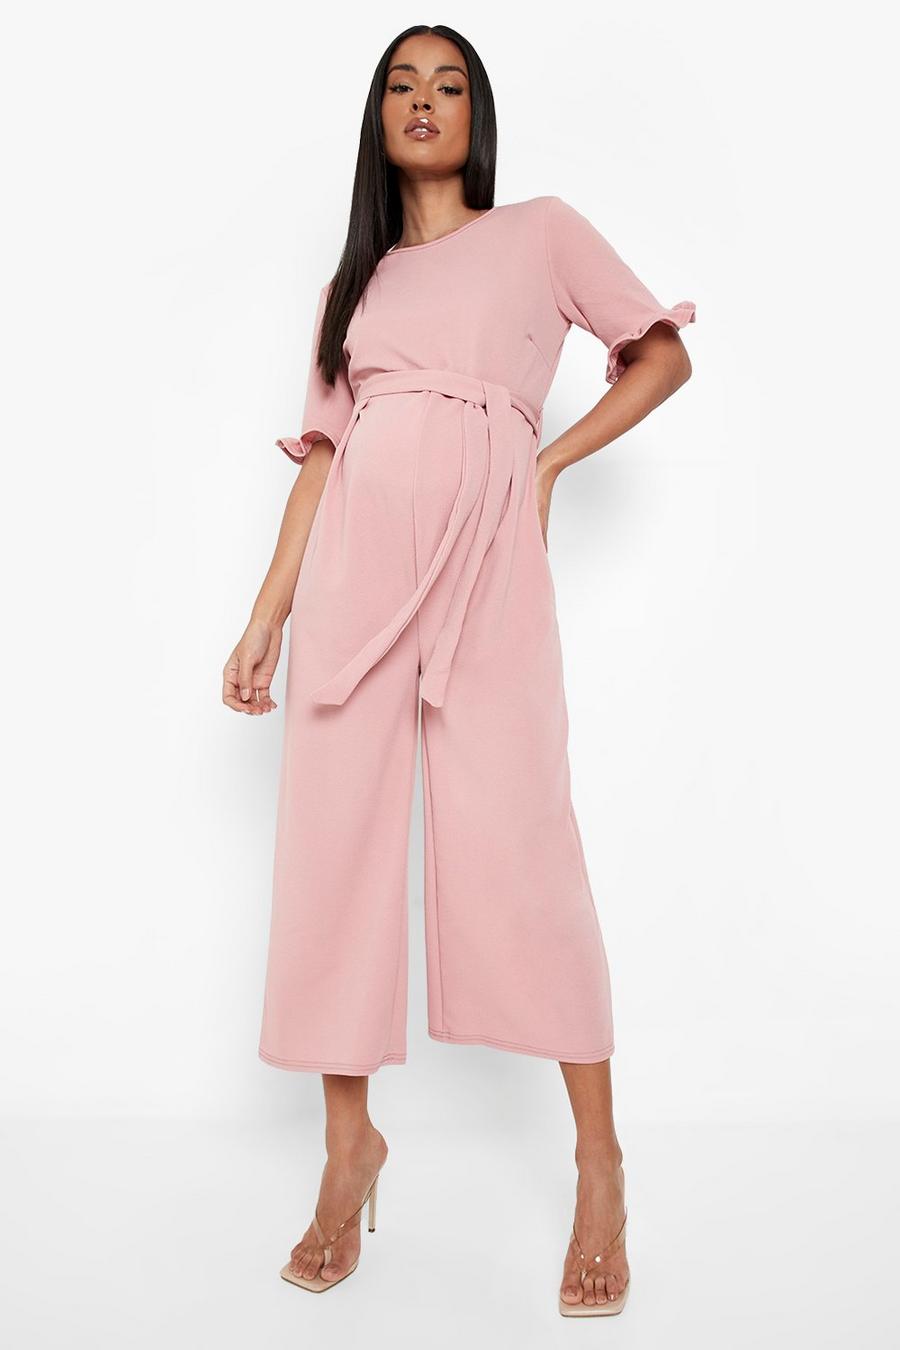 Maternity Jumpsuits, Maternity Rompers